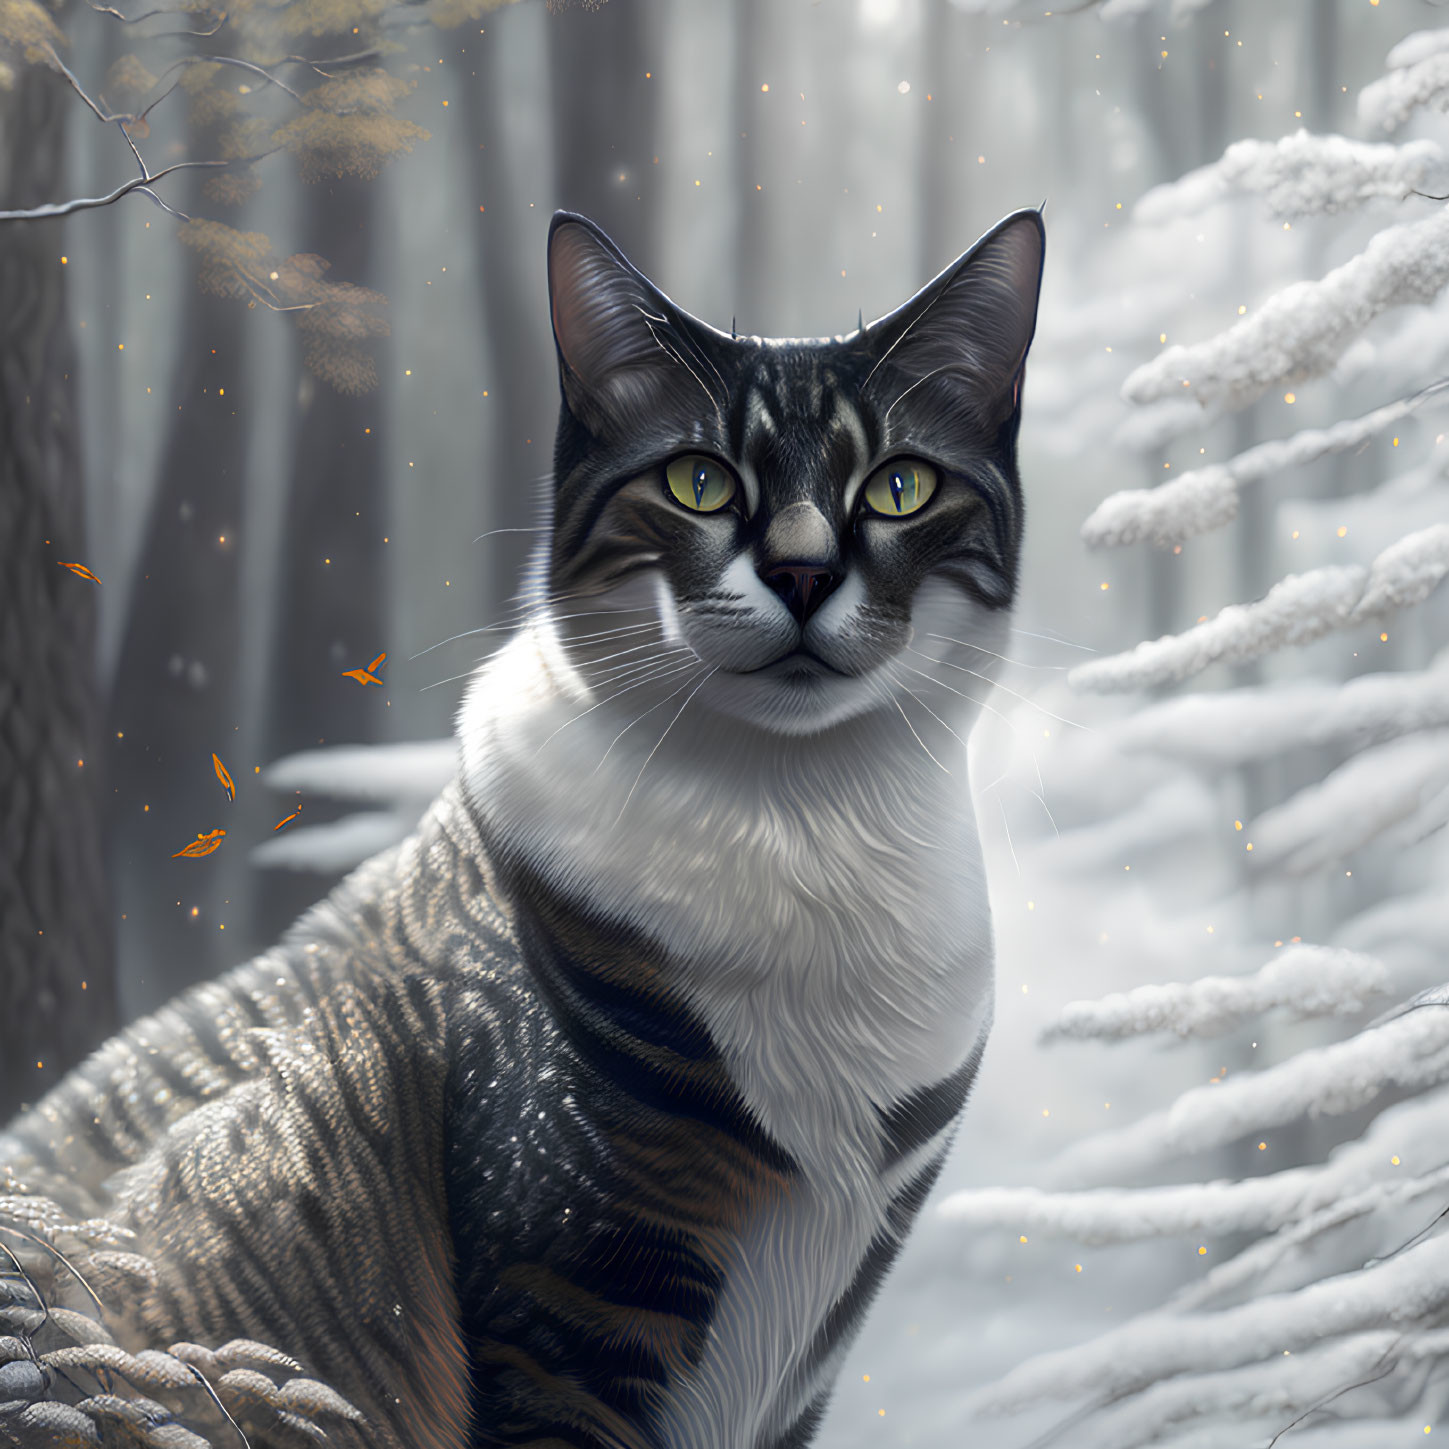 Tabby Cat with Green Eyes in Snowy Forest with Falling Snowflakes